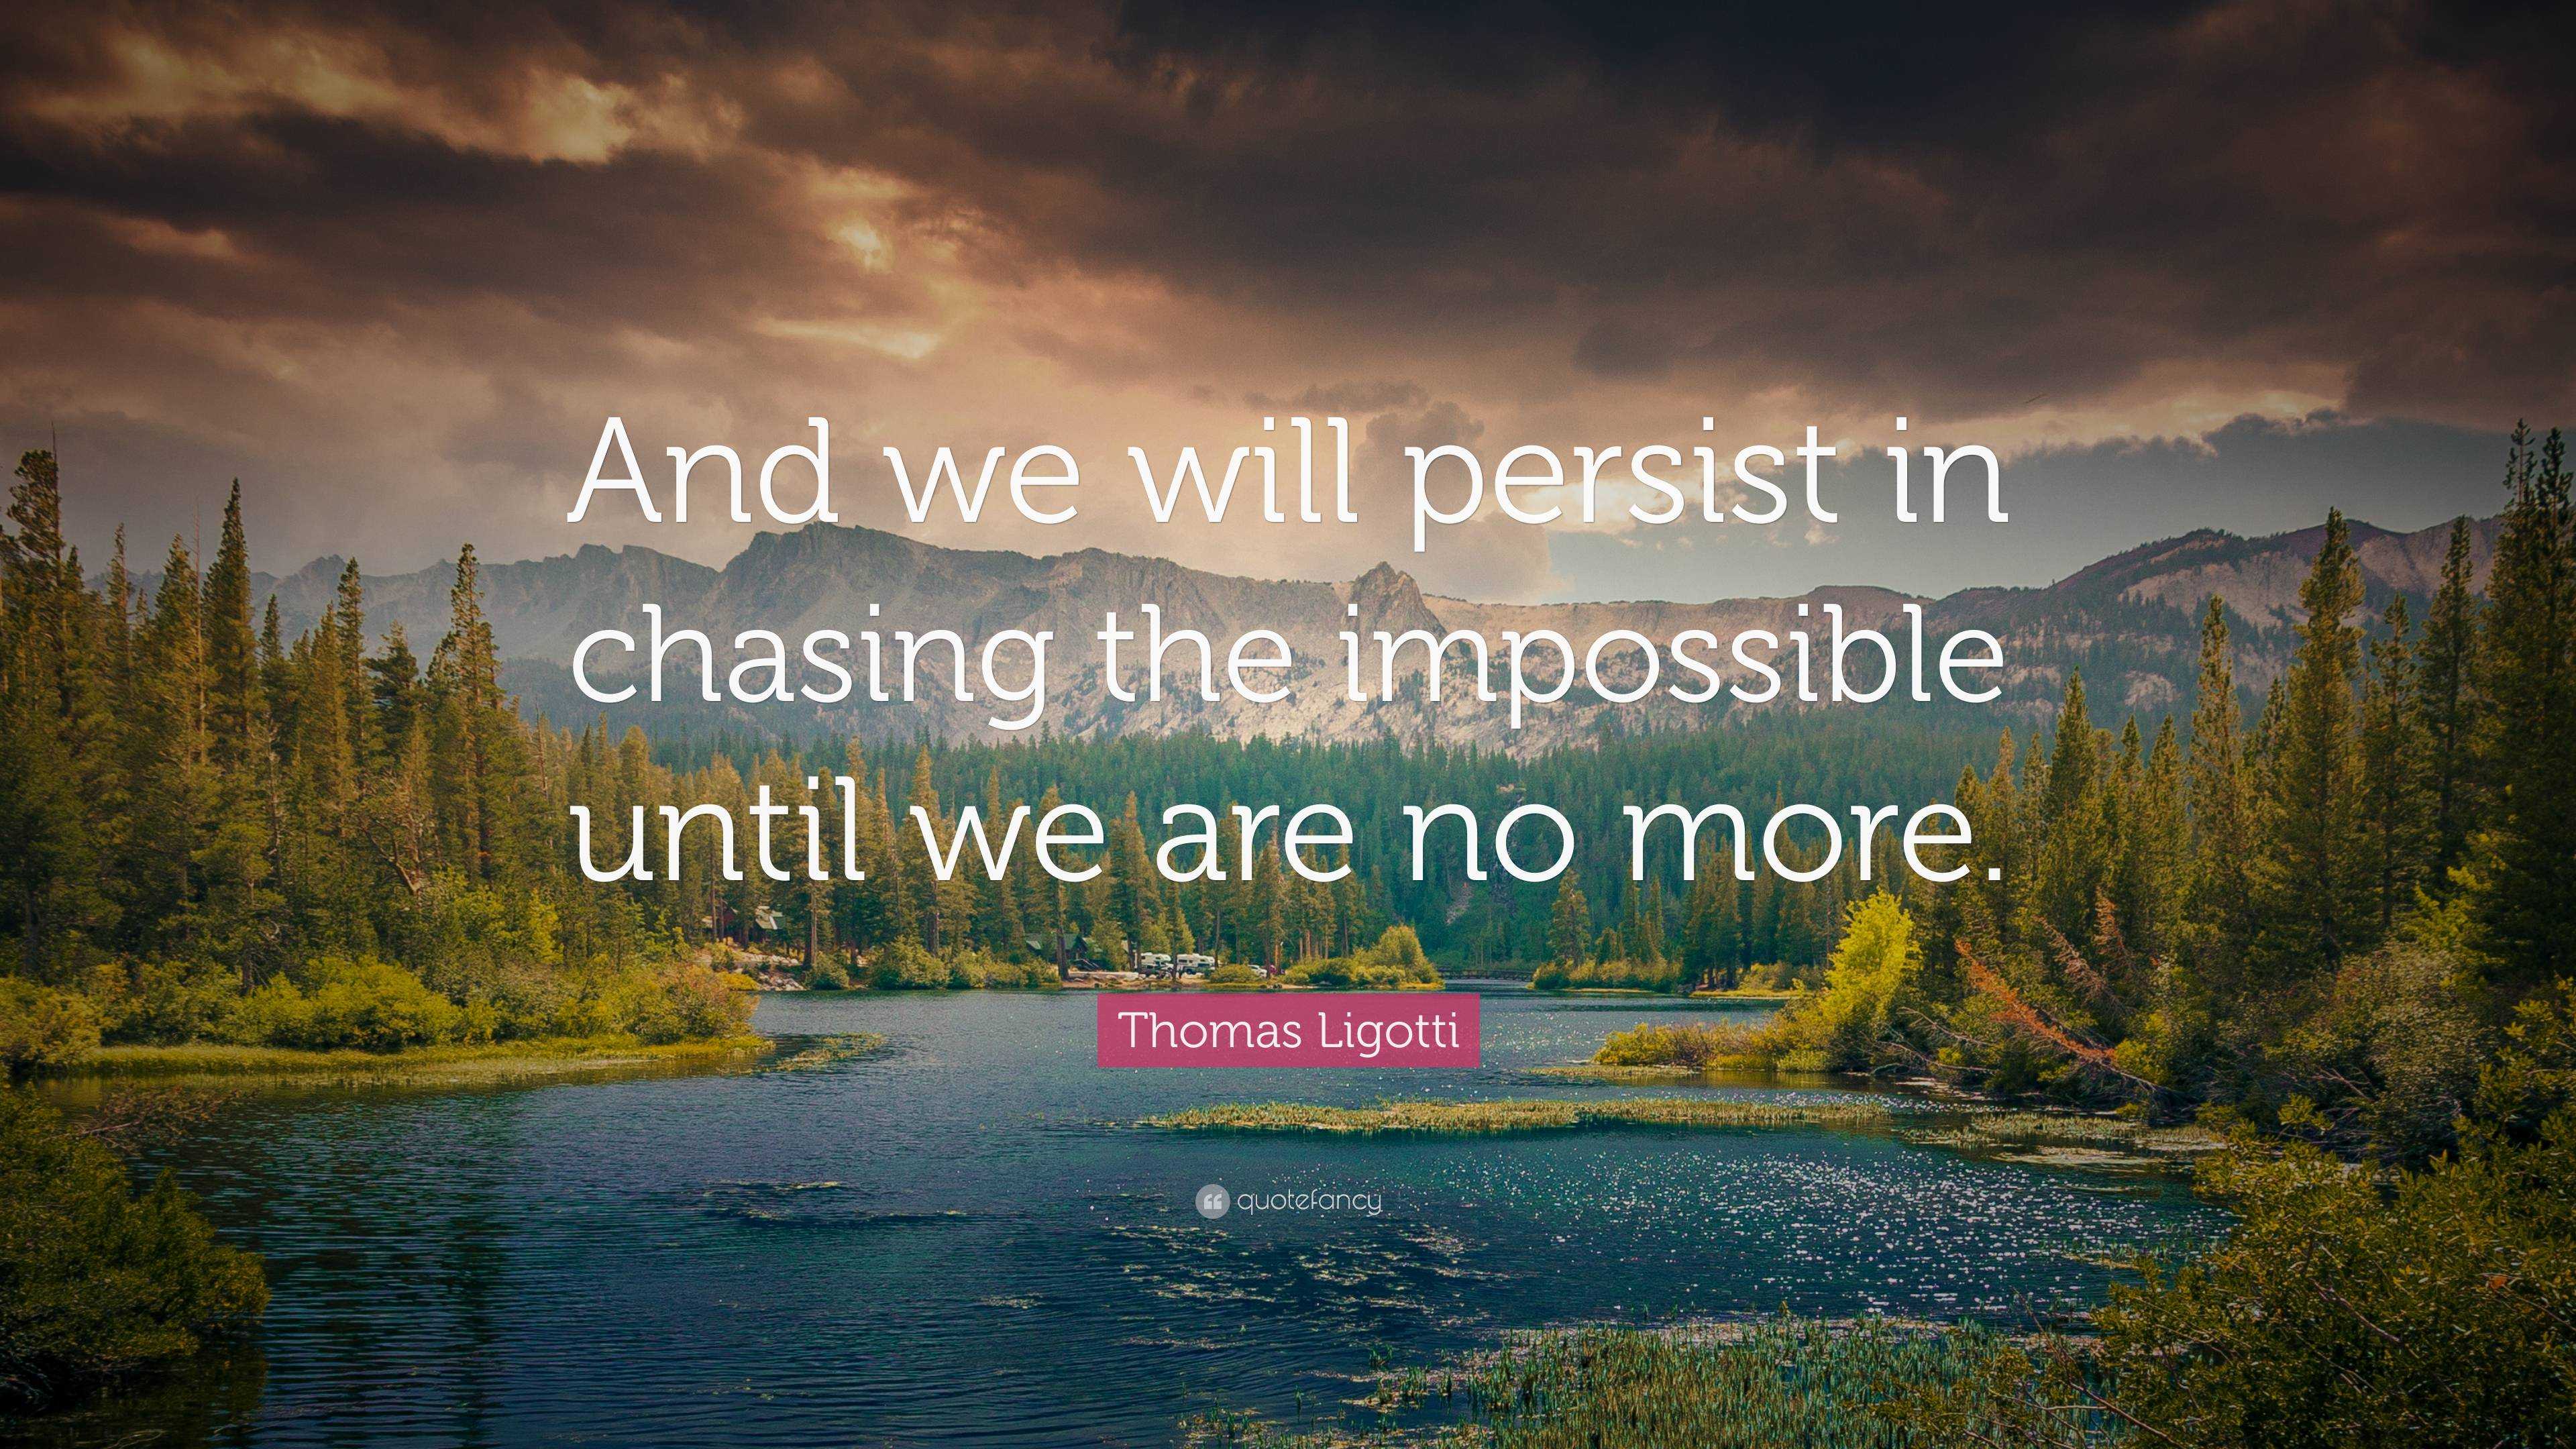 Thomas Ligotti Quote: “And we will persist in chasing the impossible ...